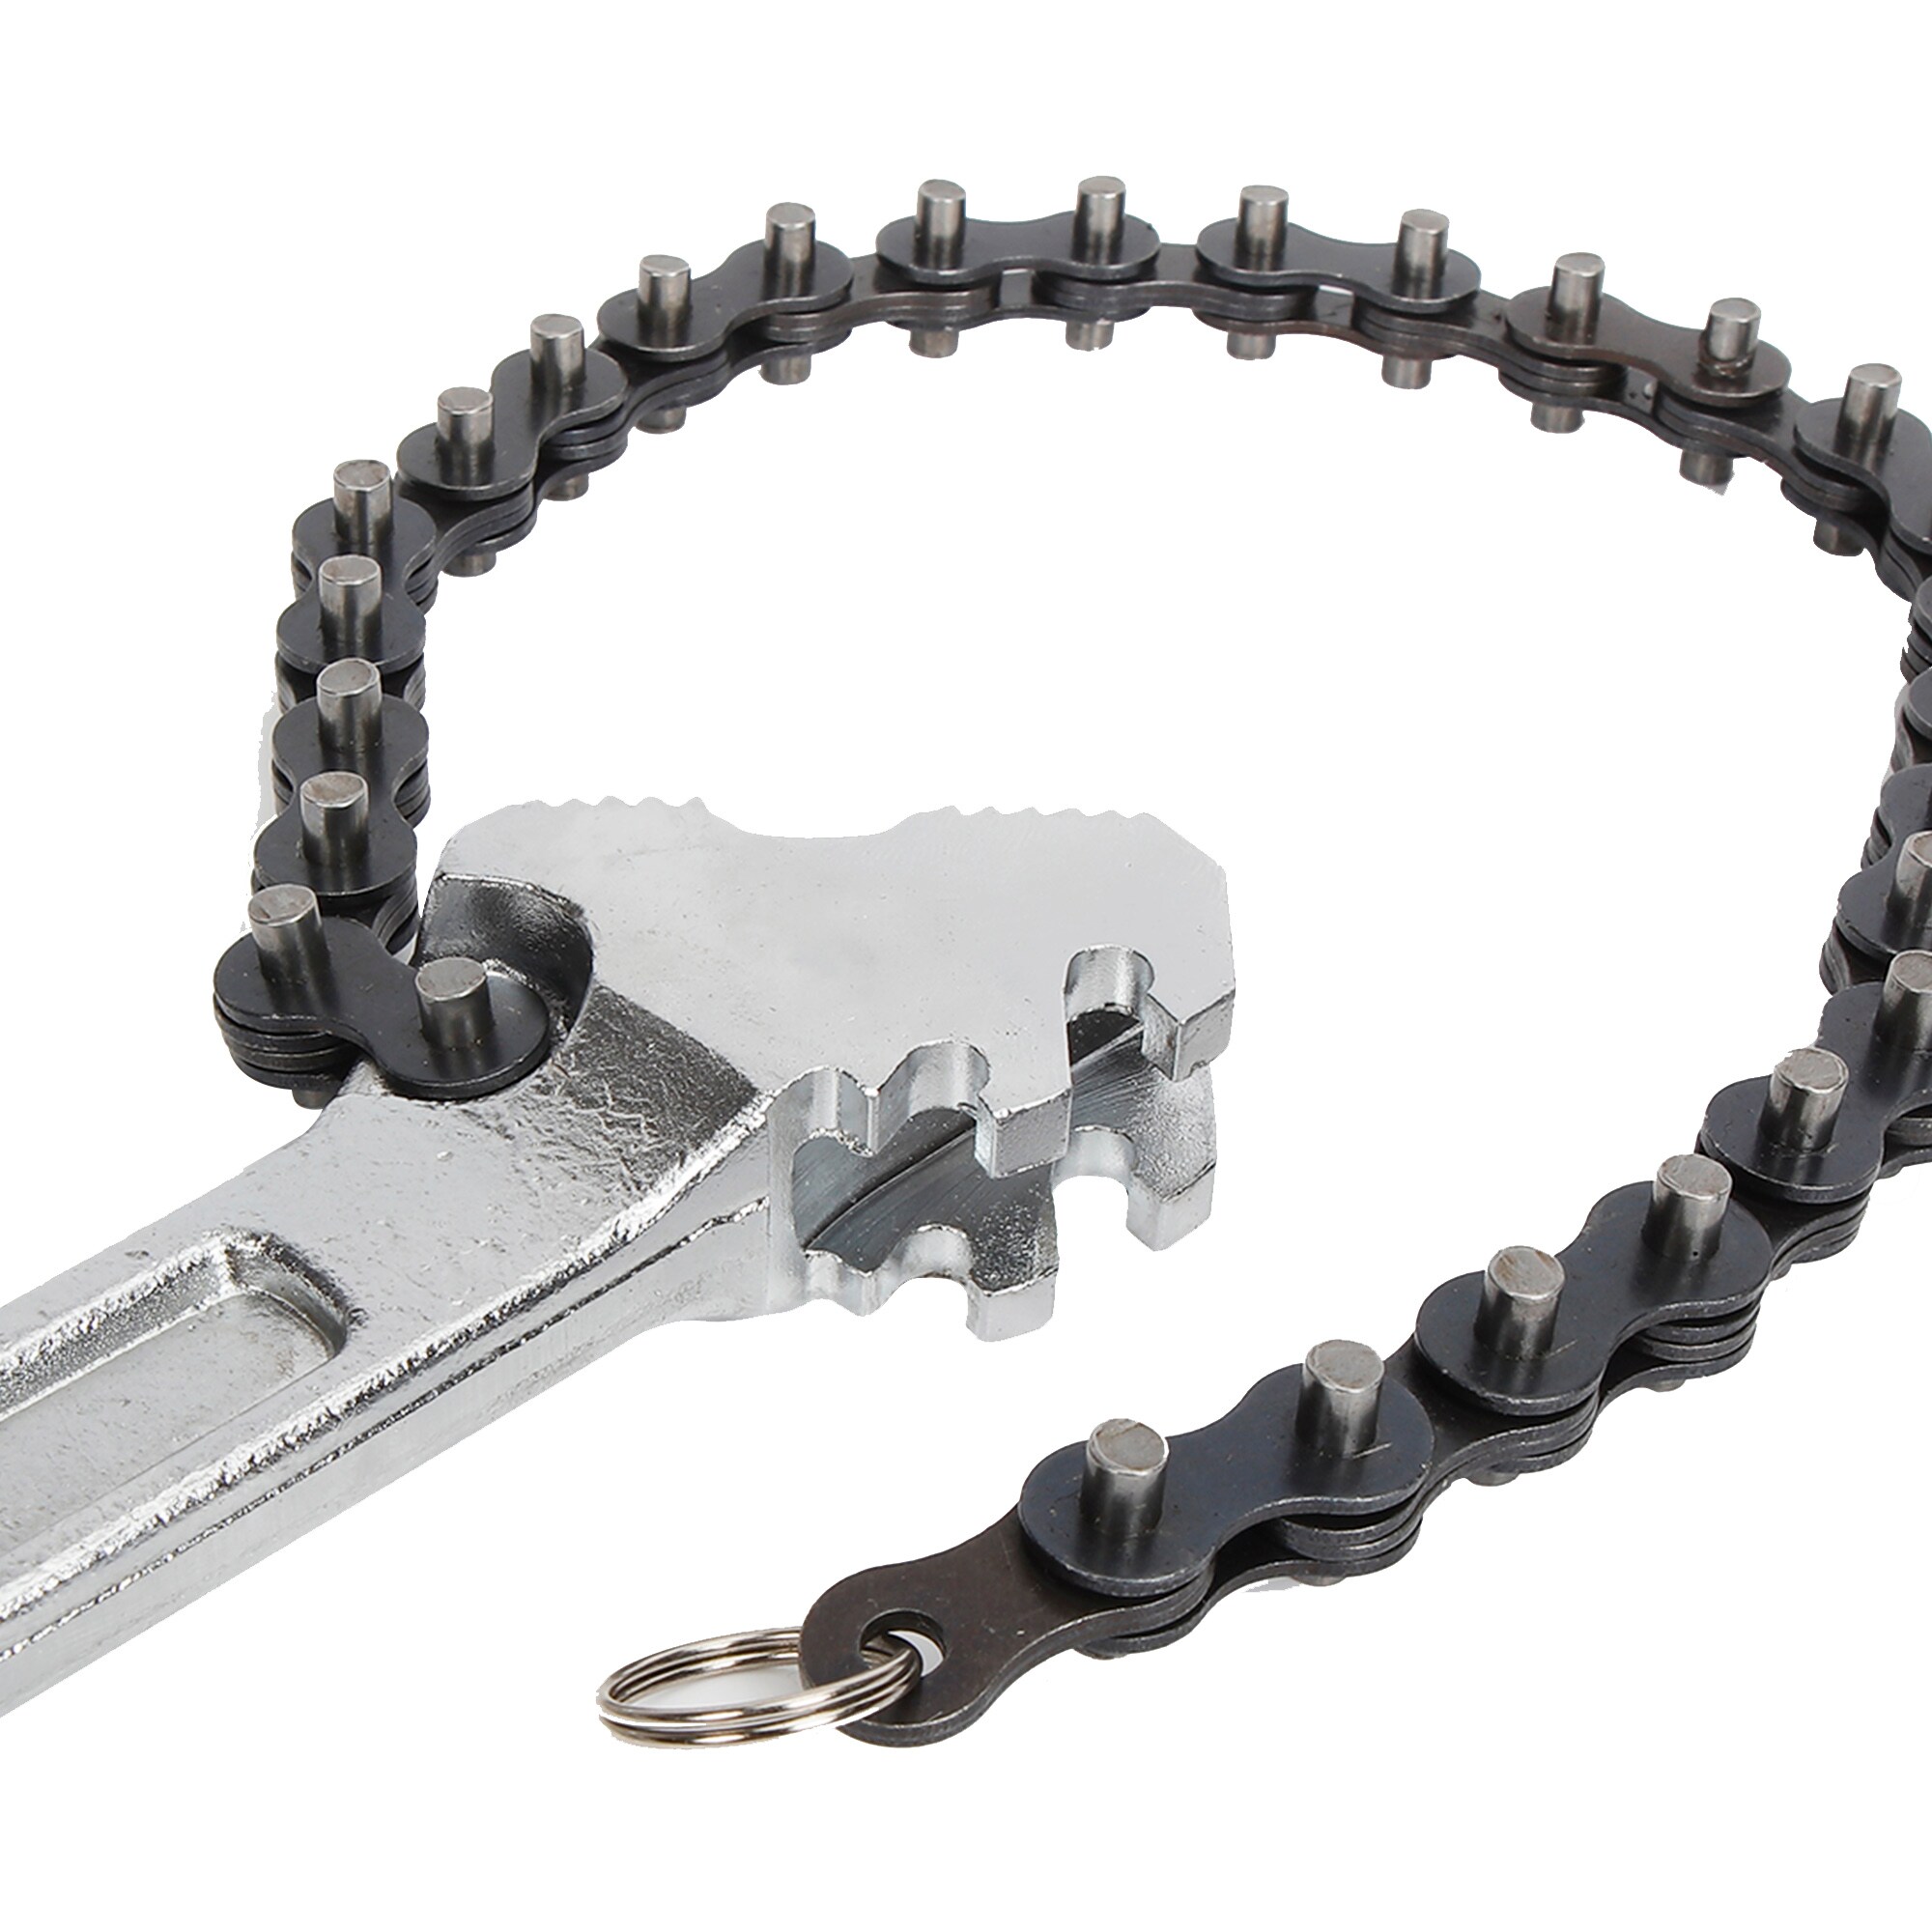 Klein Tools - Chain & Strap Wrench: 5 Max Pipe, 24 Chain Length